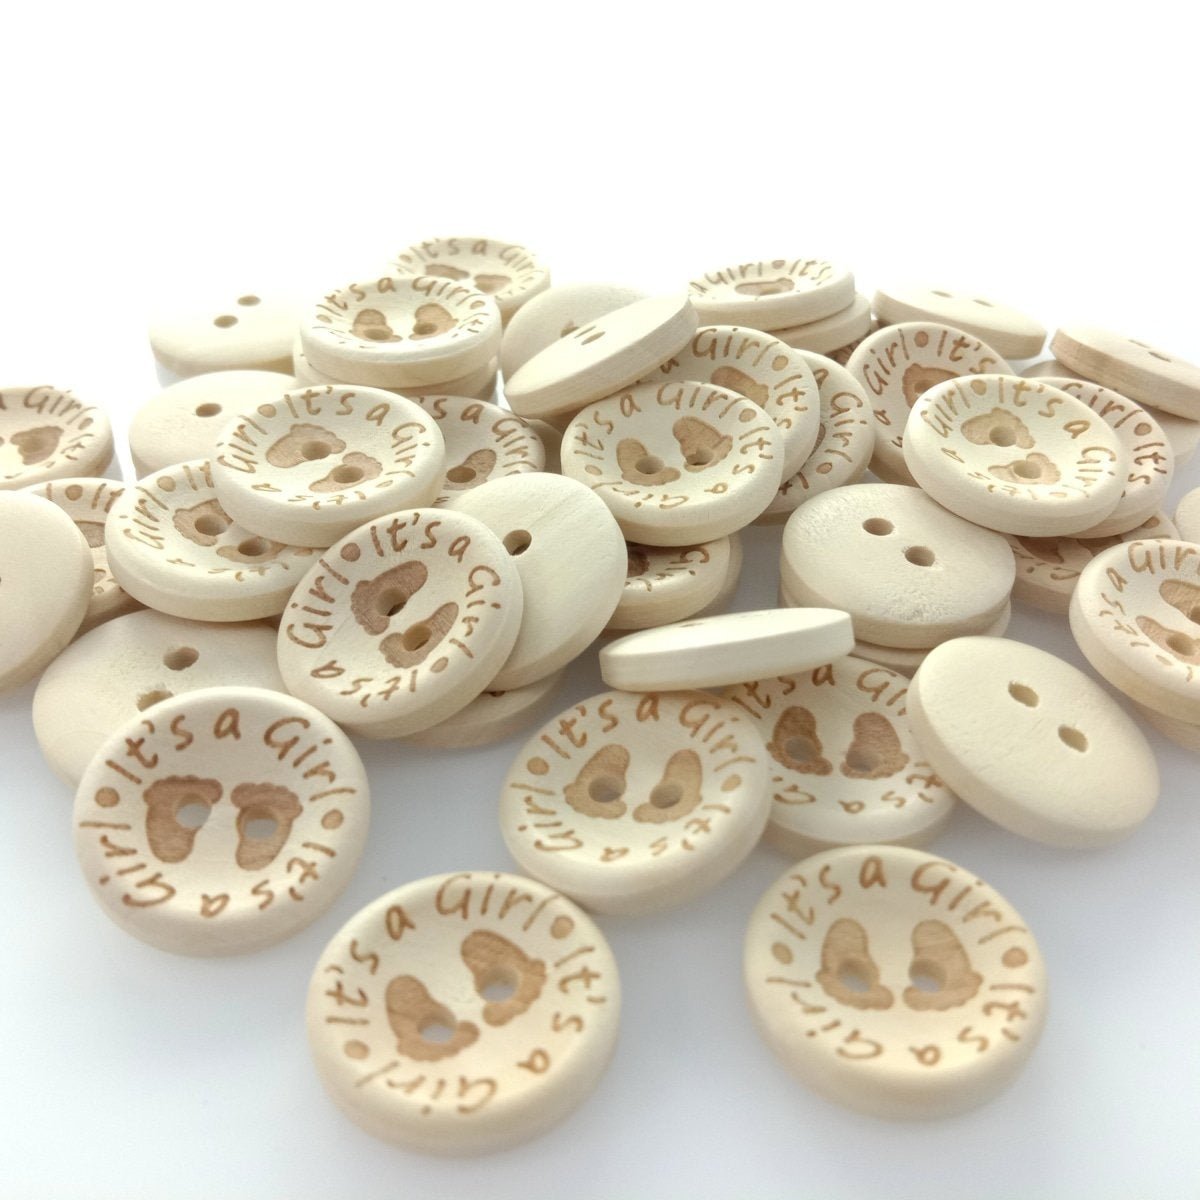 15/20/25mm It's a Girl/Boy Wooden Button Natural Wood Sewing Baby Clothing Buttons - It's a Girl 20mm 50pcs - - Asia Sell